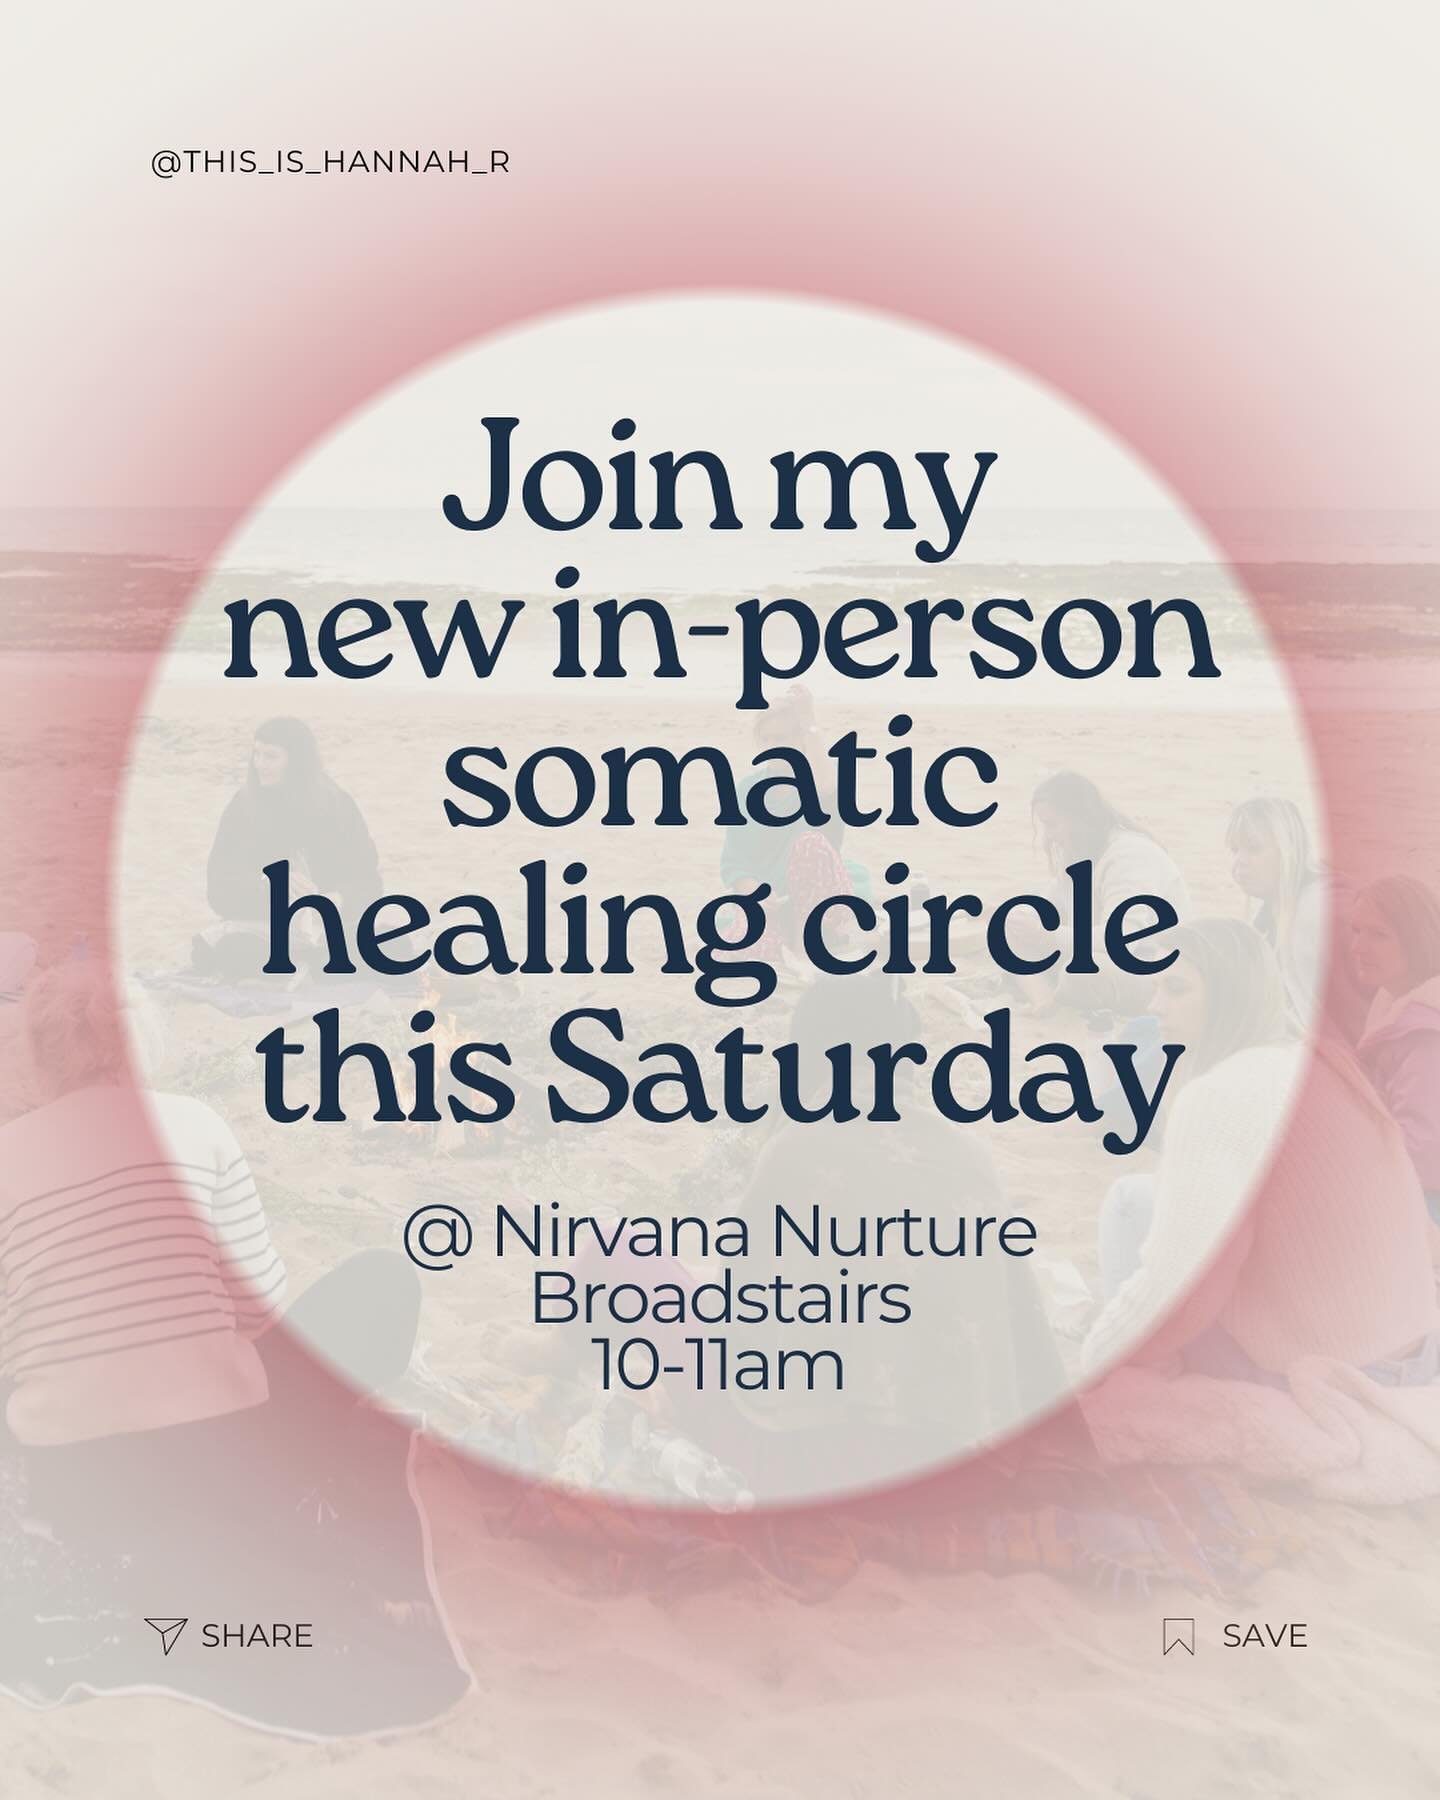 ⚡️It&rsquo;s here! A new beautifully supportive monthly circle at the beautiful healing space of @nirvananurtureuk in the heart of Broadstairs

Guided and held by yours truly.

We will shake, tap, move, clear, reflect, stretch, breathe&hellip;

Offer